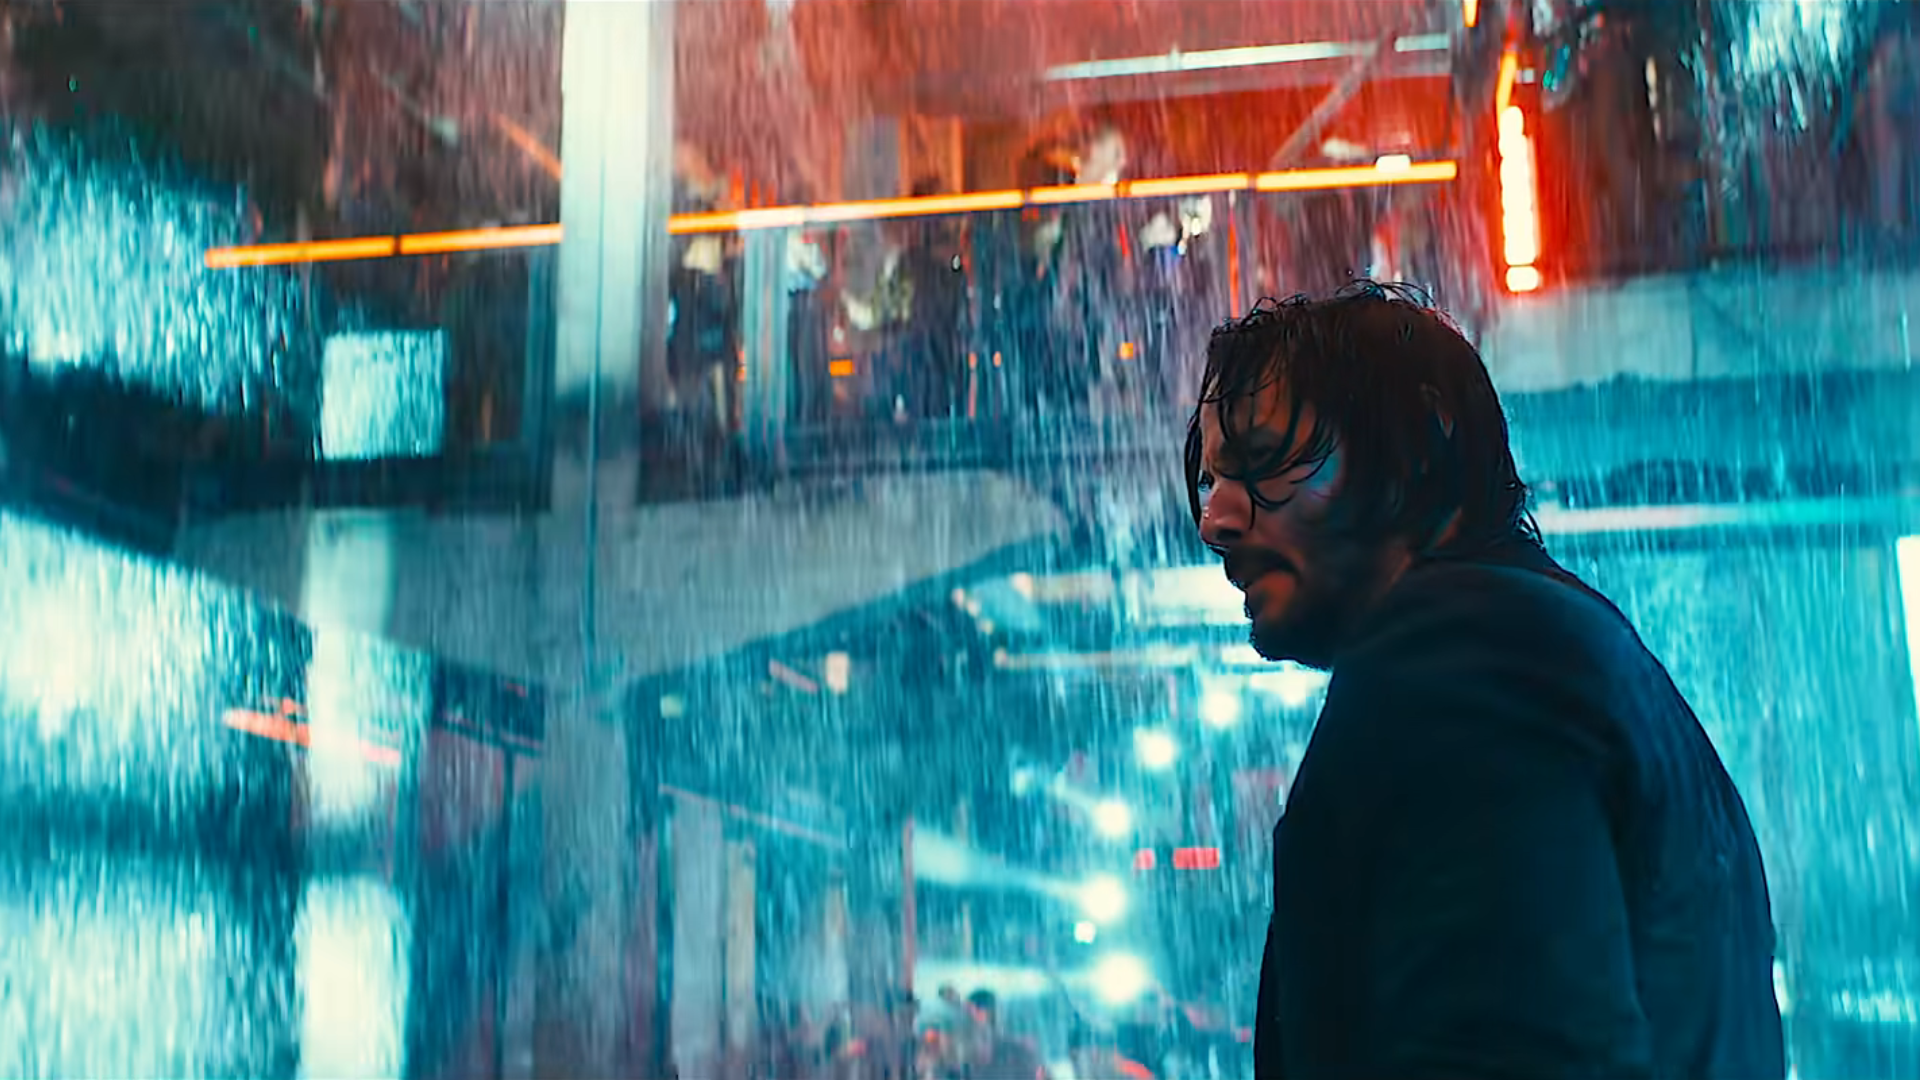 John Wick: Chapter 4: When Action & Aesthetic Collide